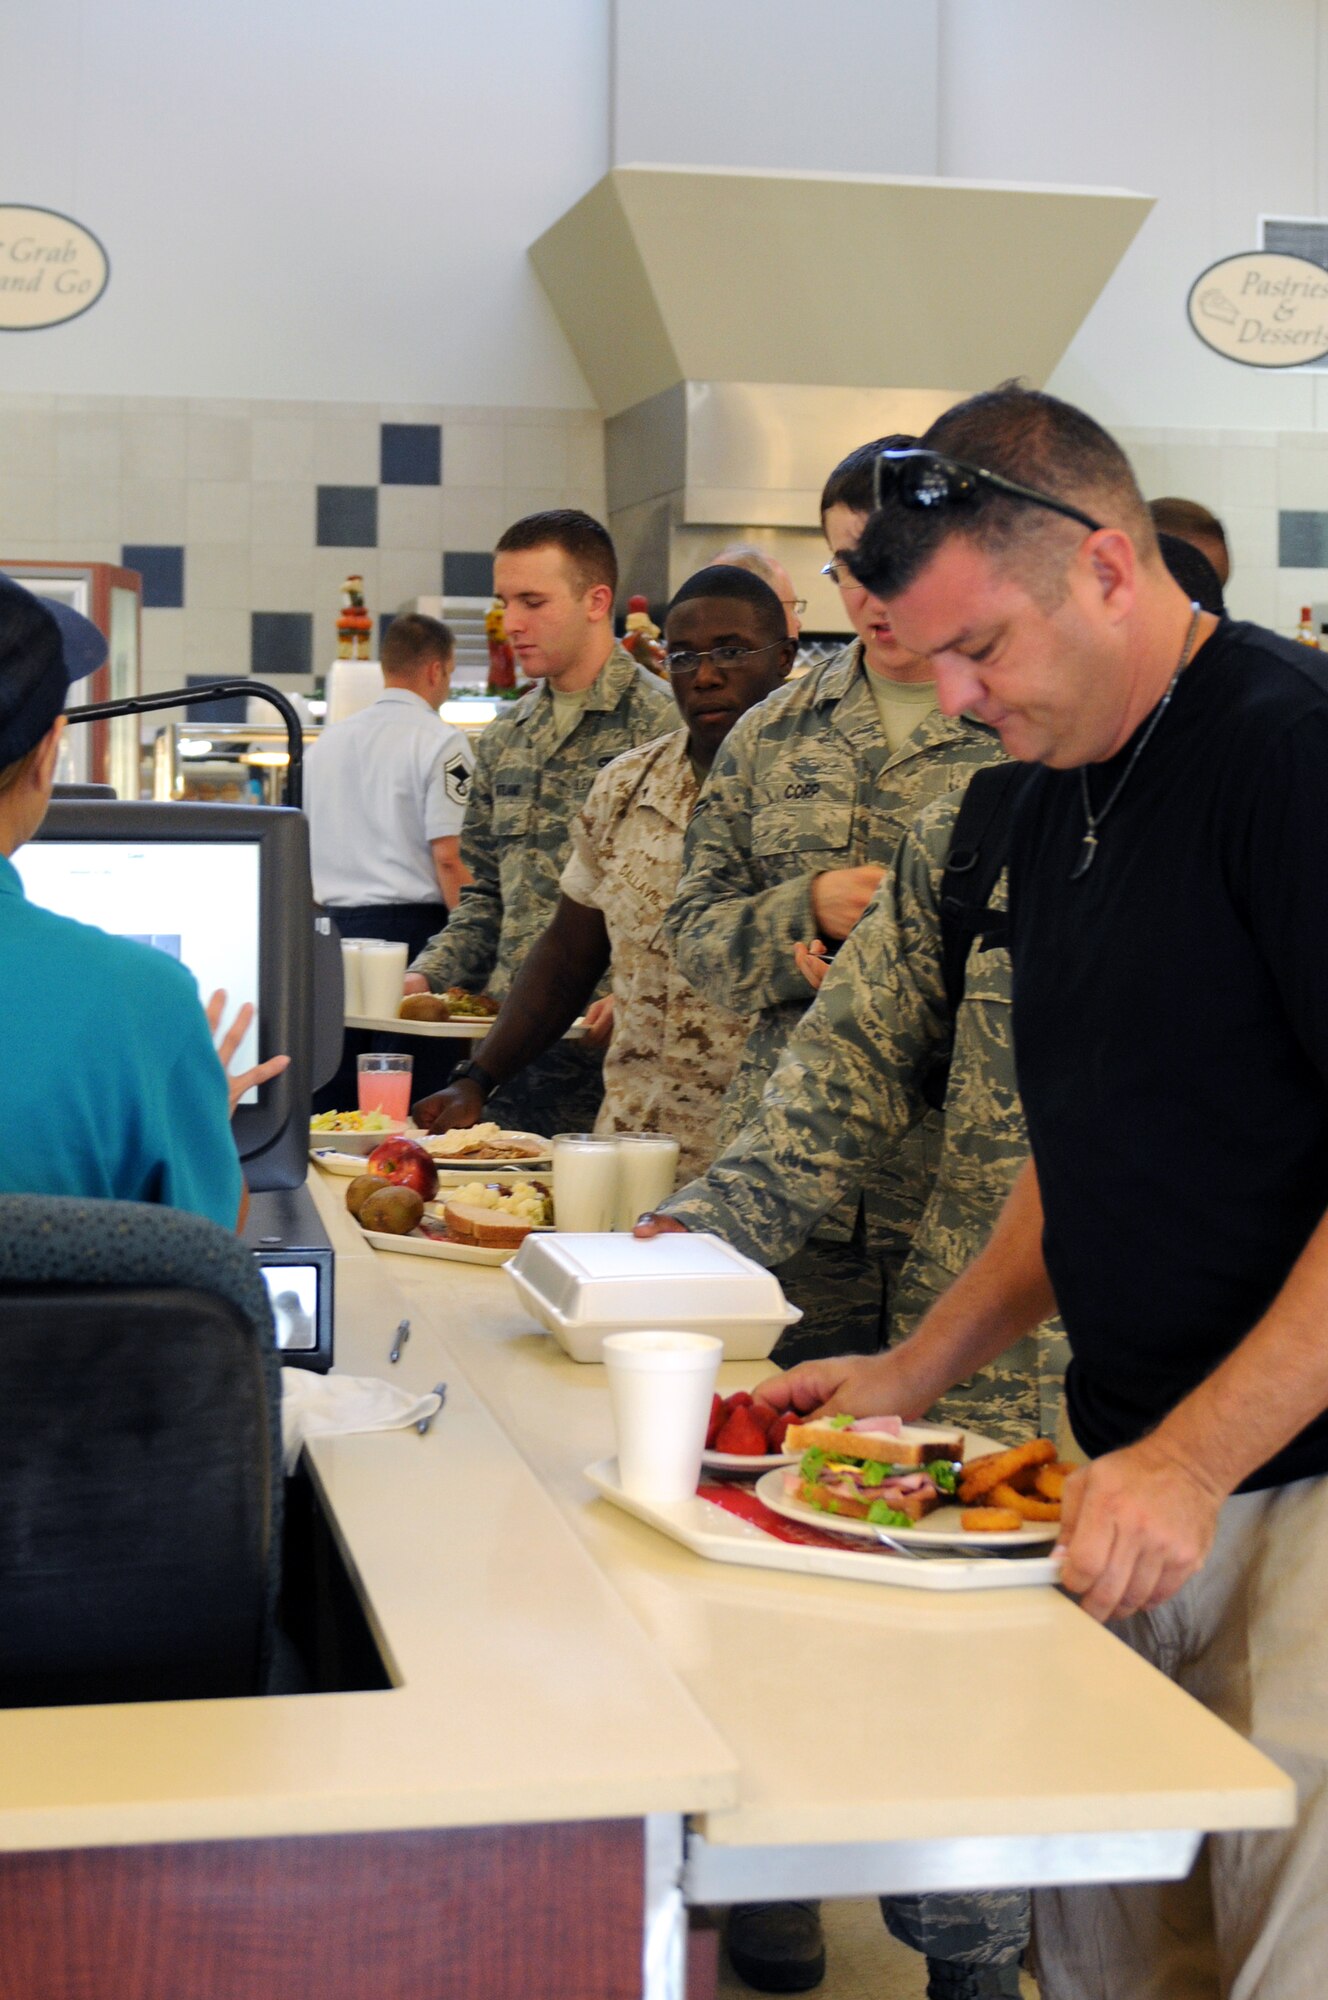 Customers pay for their meals Aug. 23 at the Hercules Dining Facilty. Active-duty members are the largest customer demographic served at the dining facility, but contractors, retirees and families are also welcome. (Courtesy photo by Ashley Mangin)